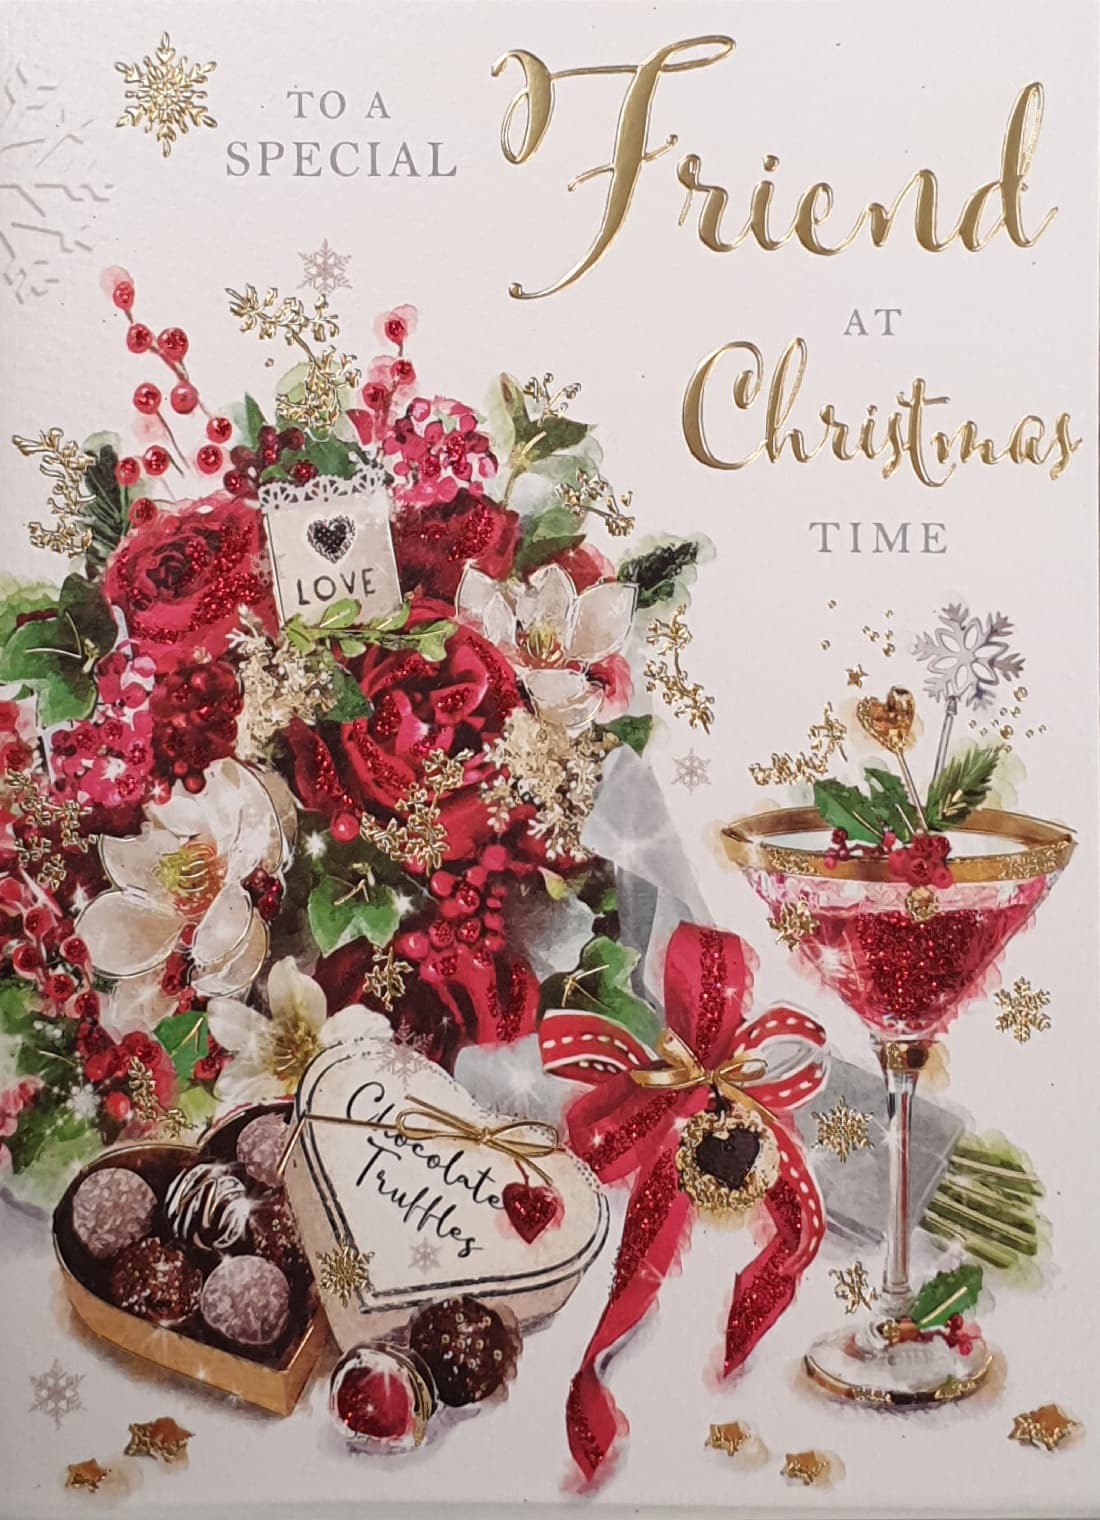 Friend Christmas Card - At Christmas Time / cocktail, Chocolates & Roses